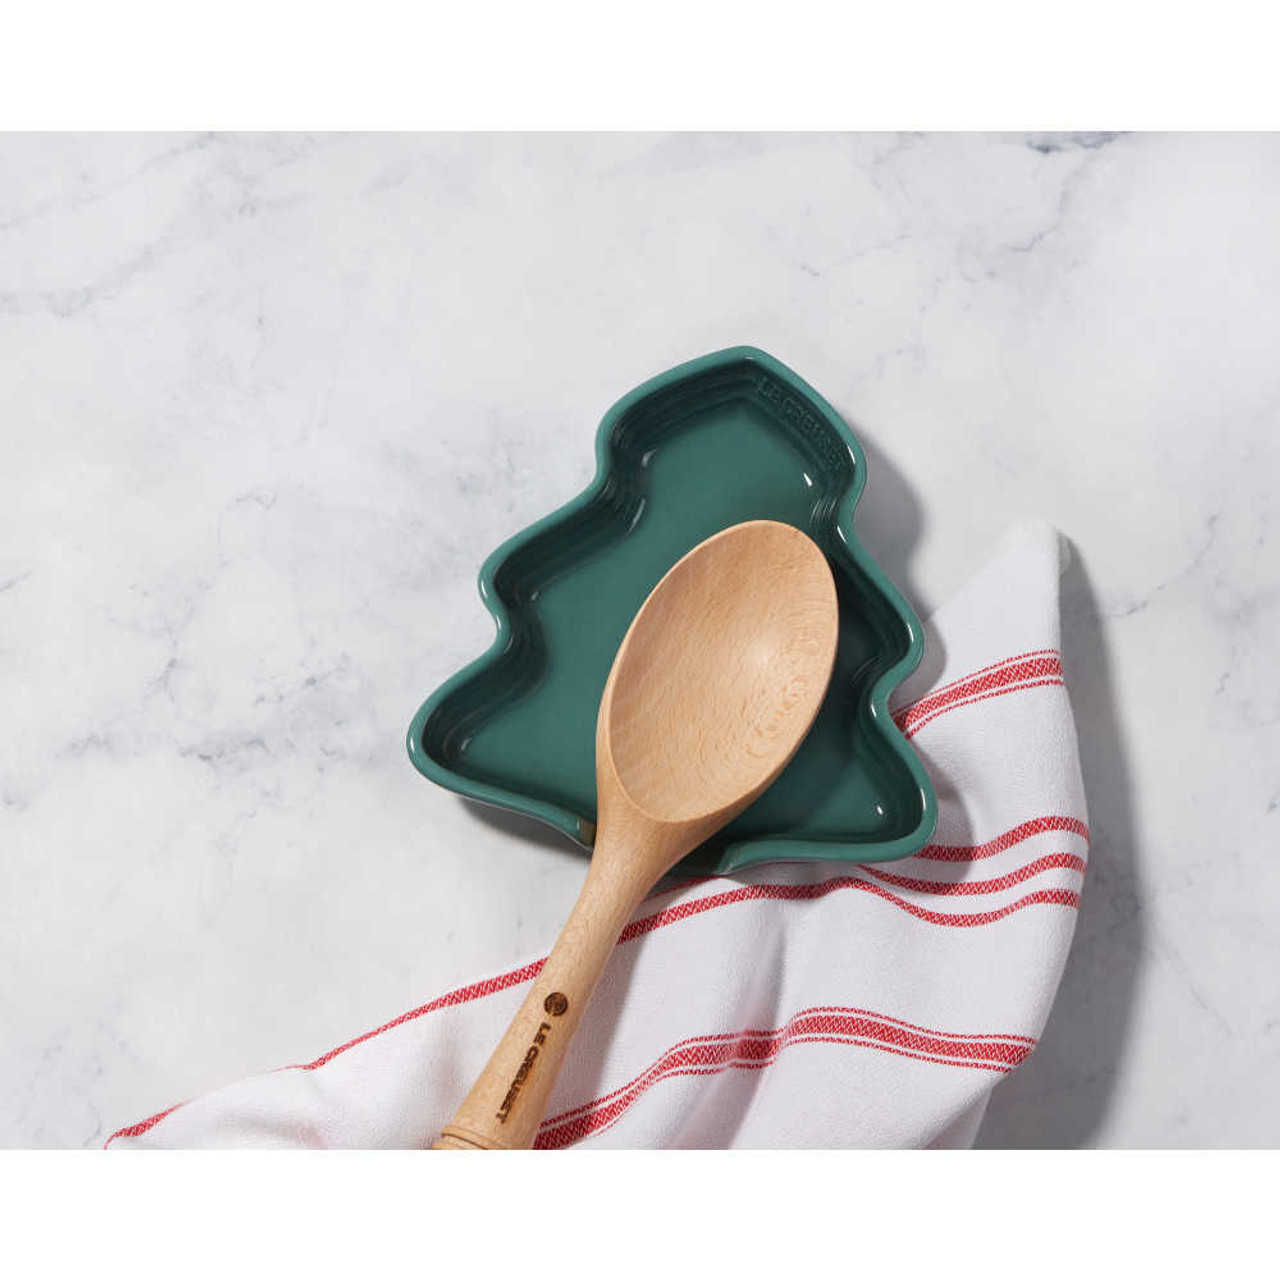 Le Creuset Wooden Spoon Set - 3 Piece – Cutlery and More